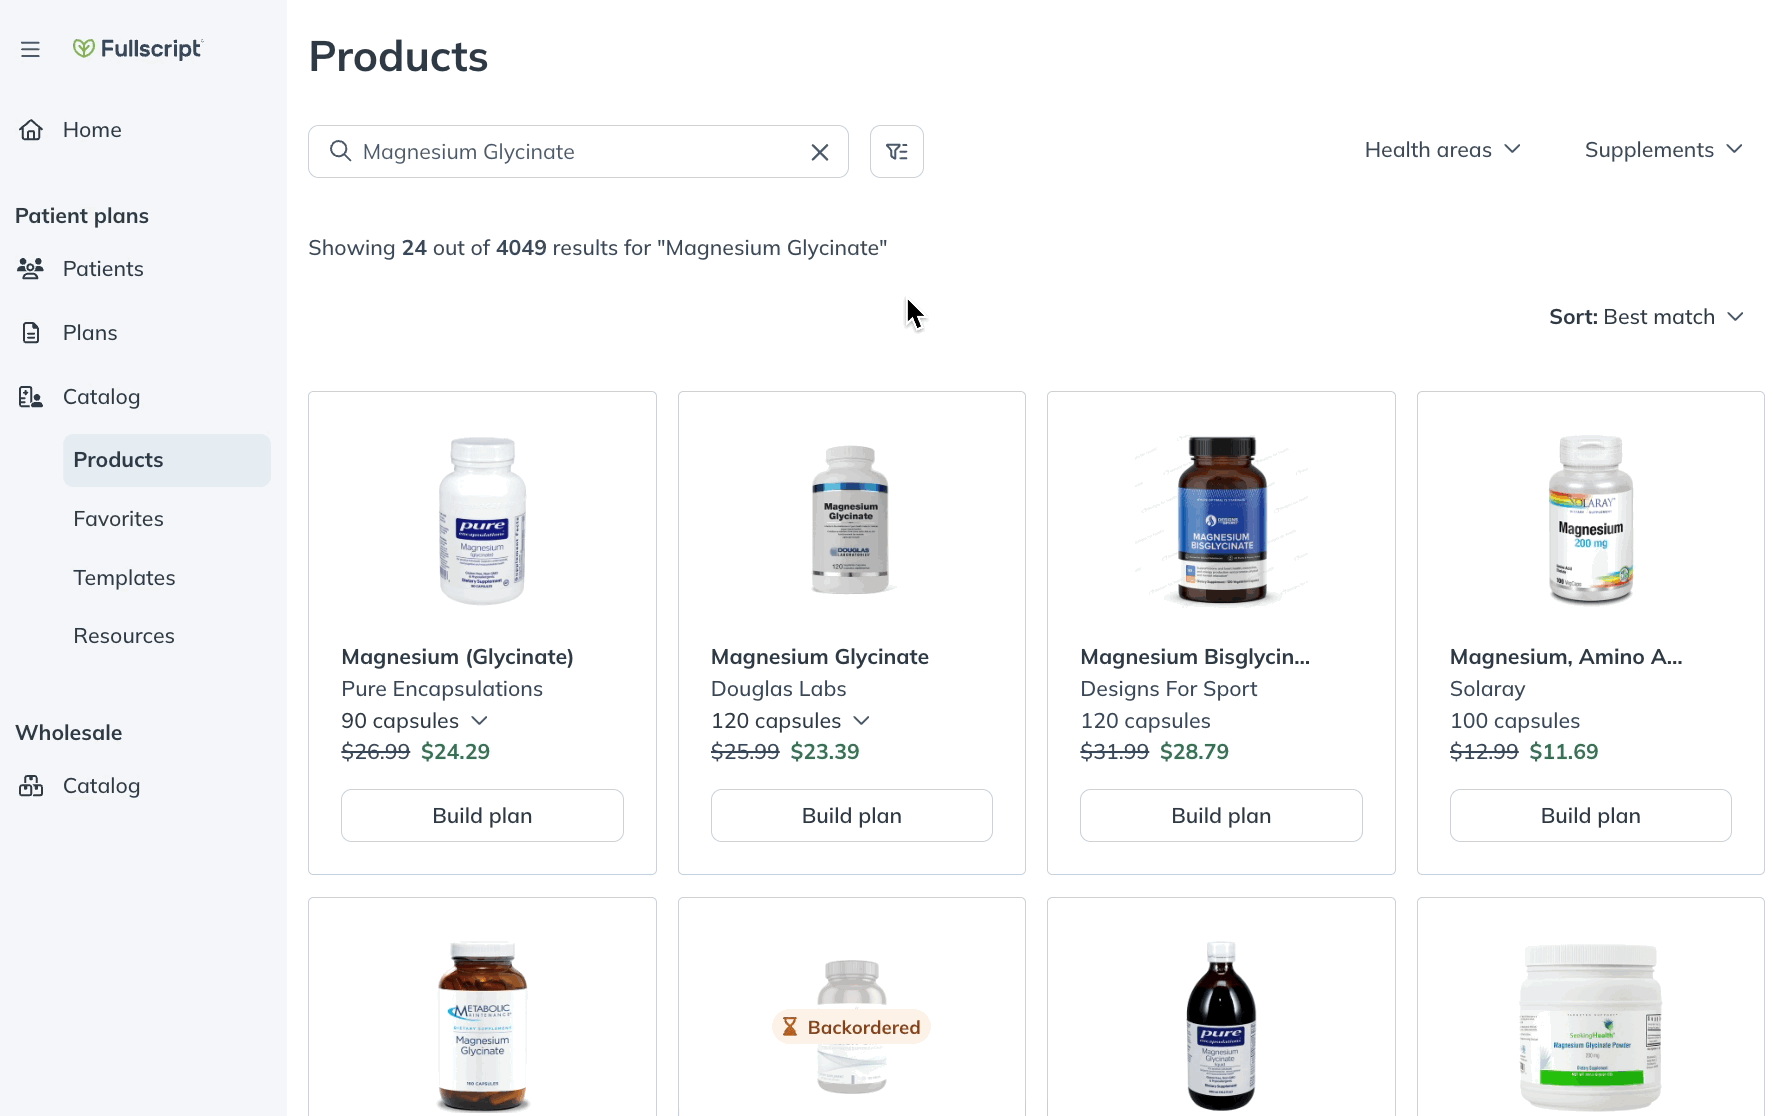 Finding and comparing similar products via the patient plans catalog.